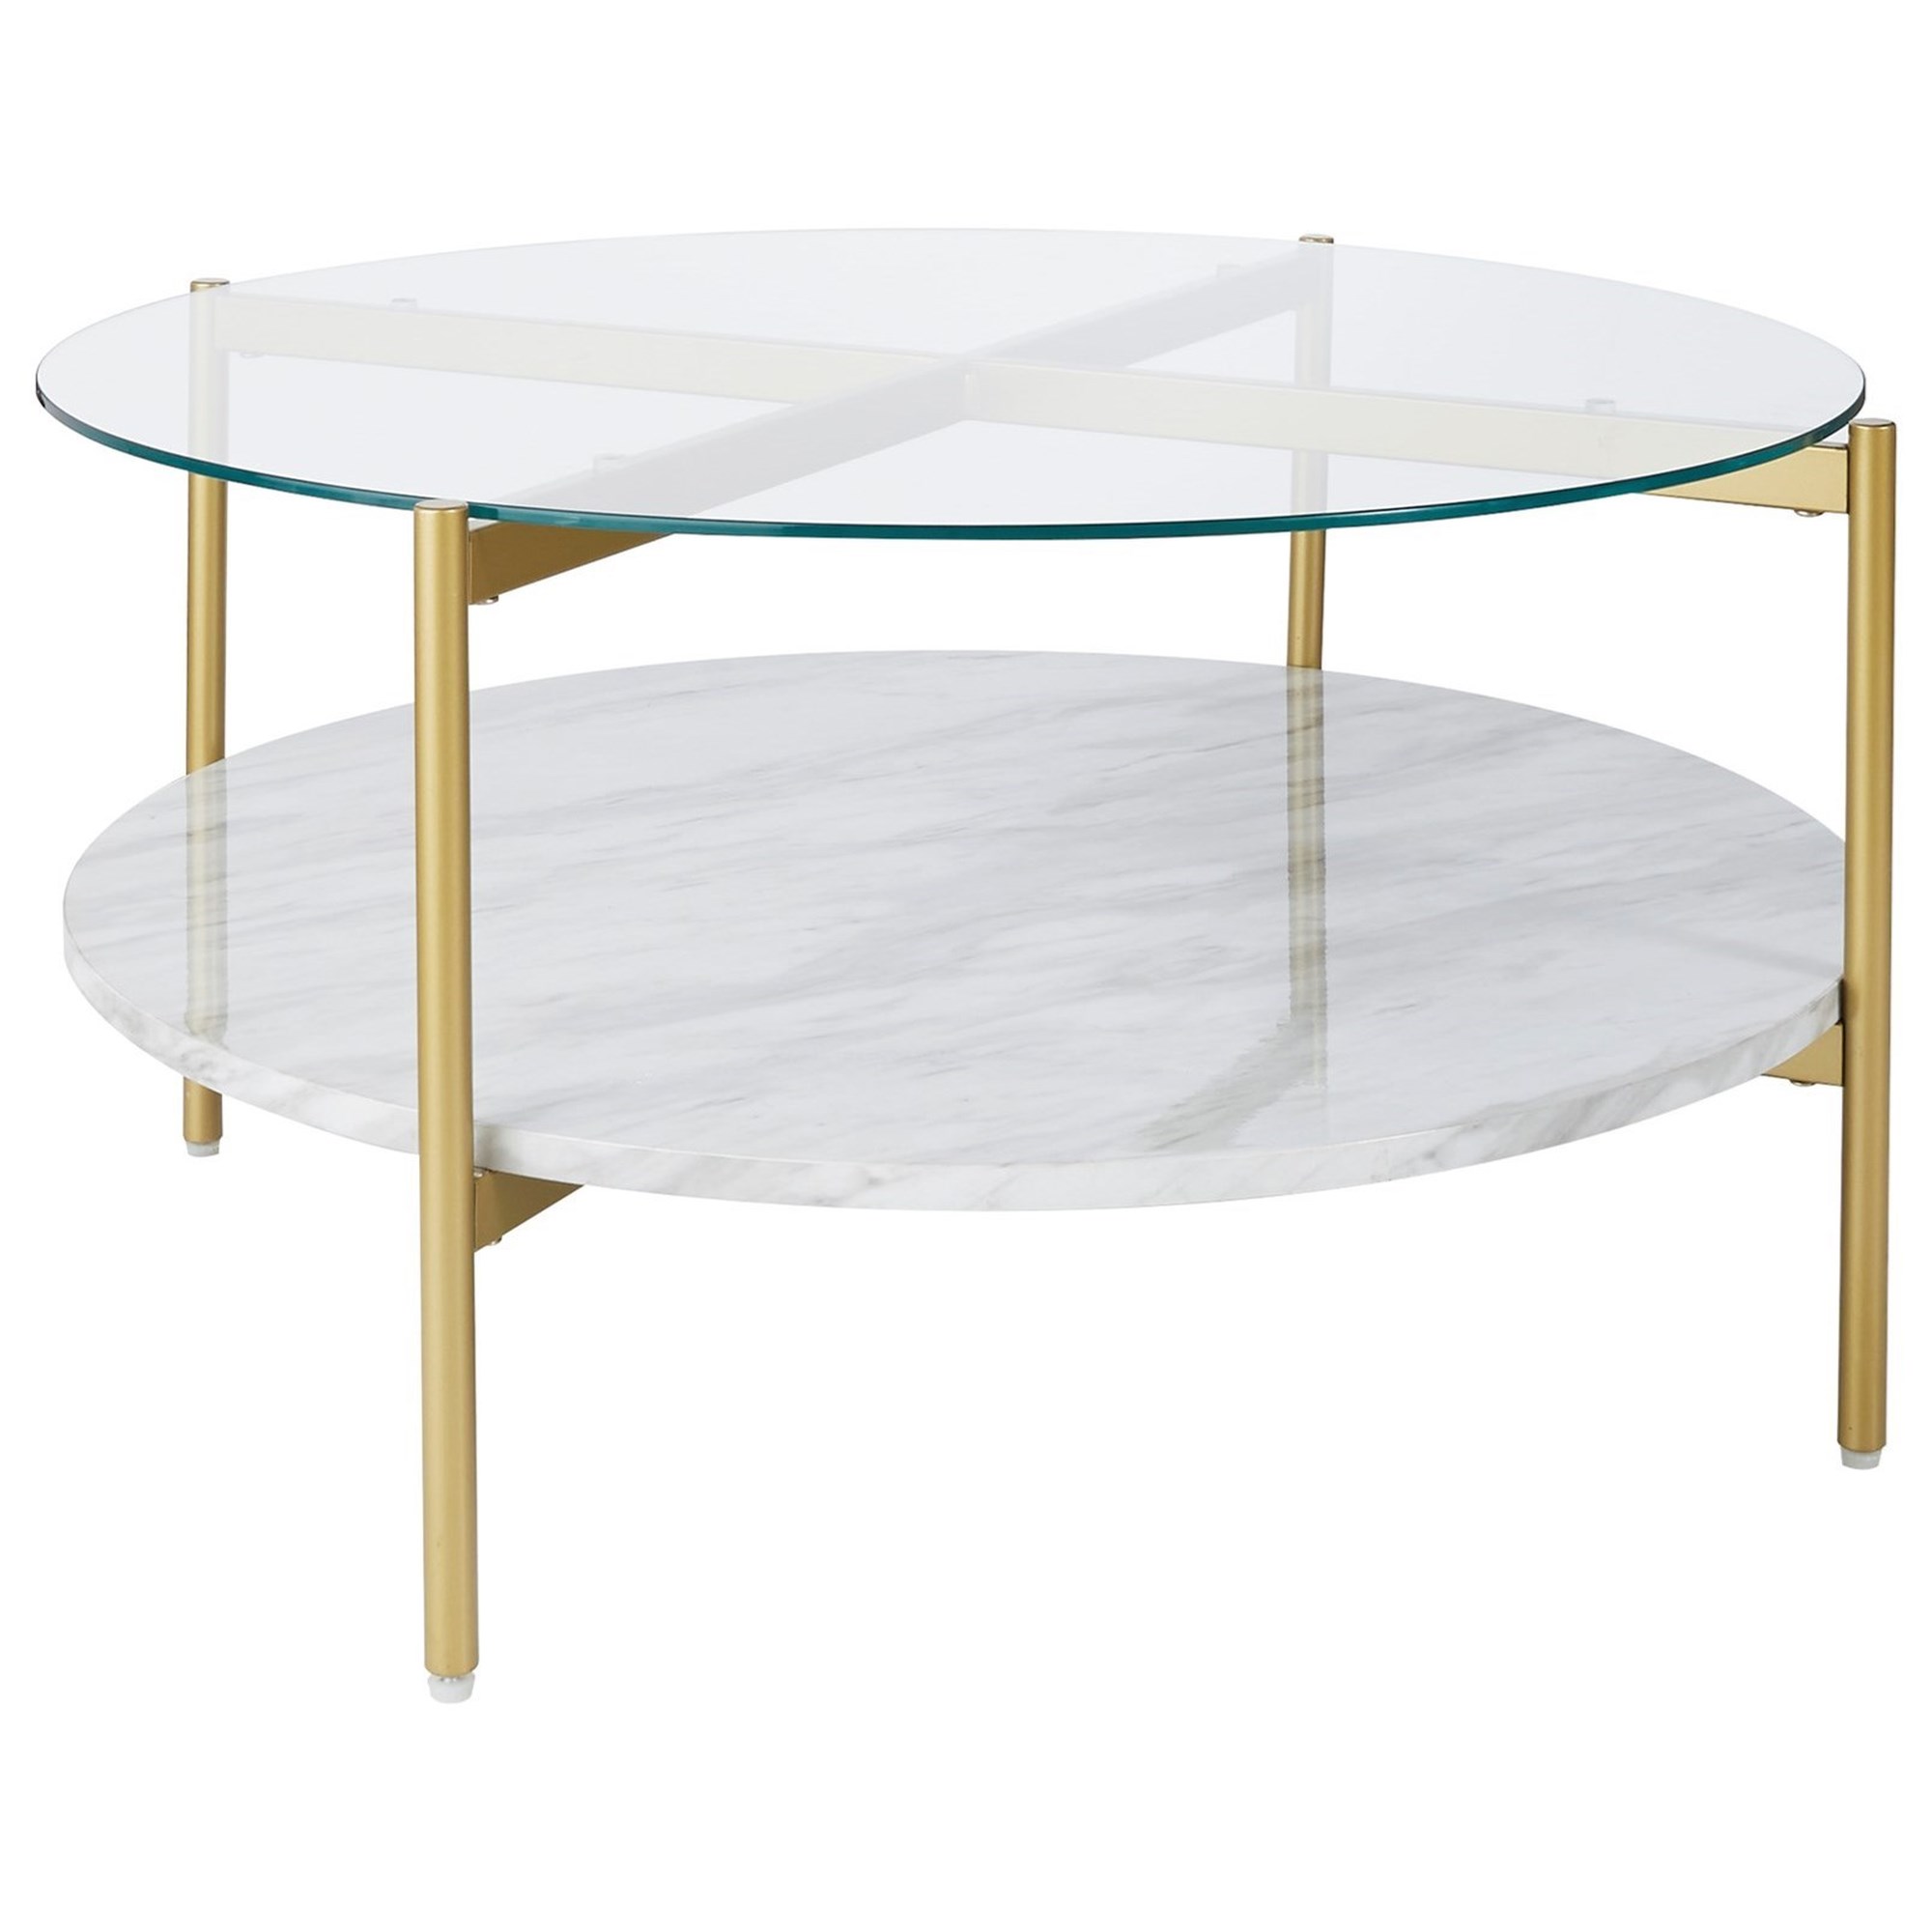 Gold | | Shelf Top Table with Wynora Faux by Furniture Marble Signature Tables T192-8 Cocktail/Coffee and Ashley Glass Cocktail Round HomeWorld Finish Design